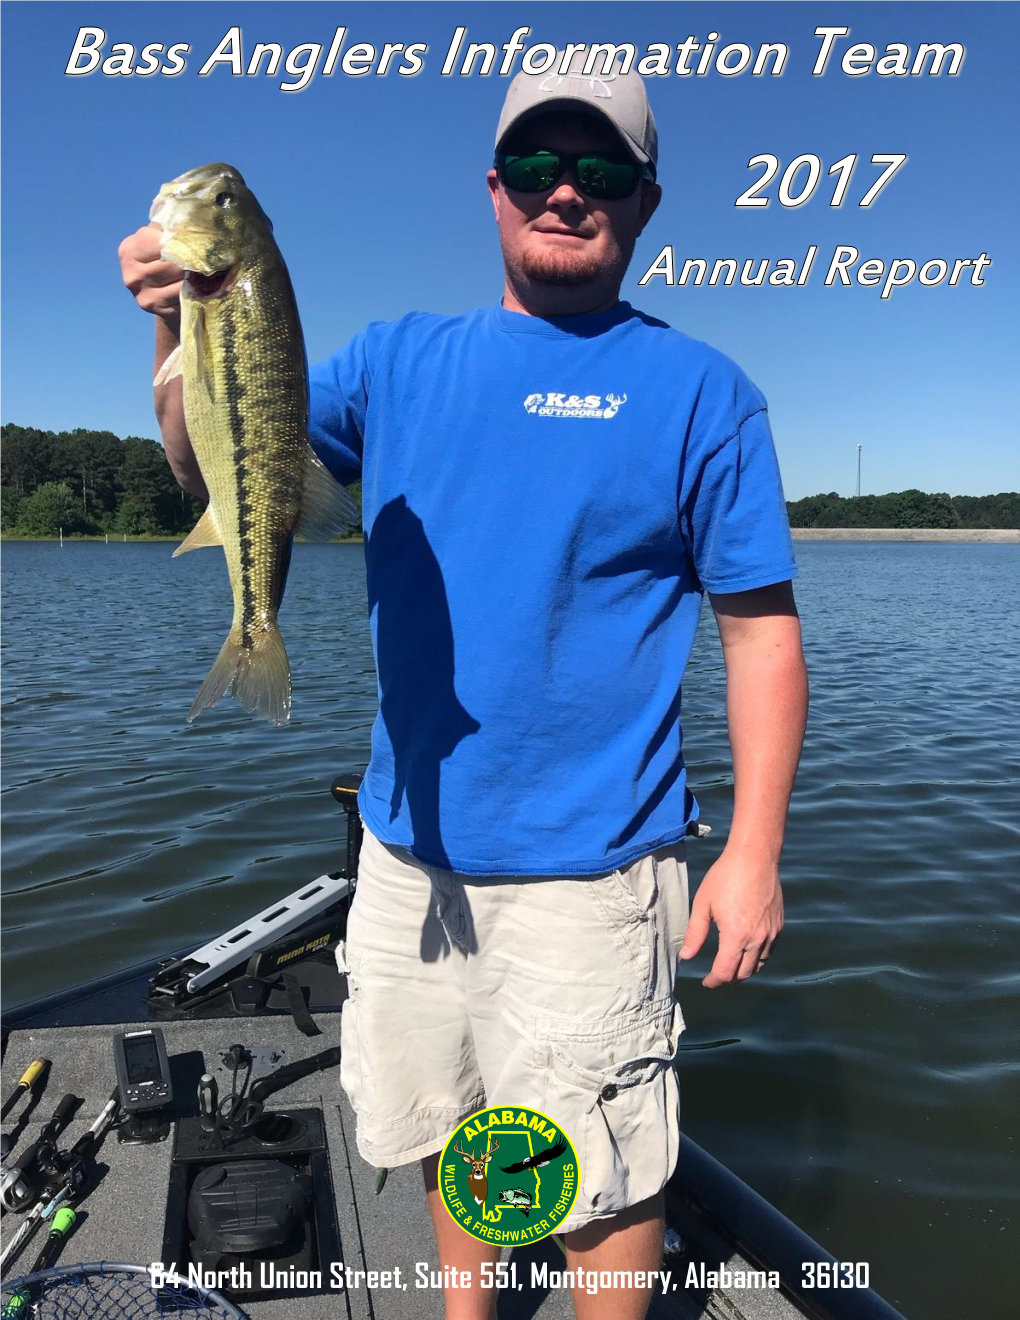 Bass Anglers Information Team 2017 Annual Report